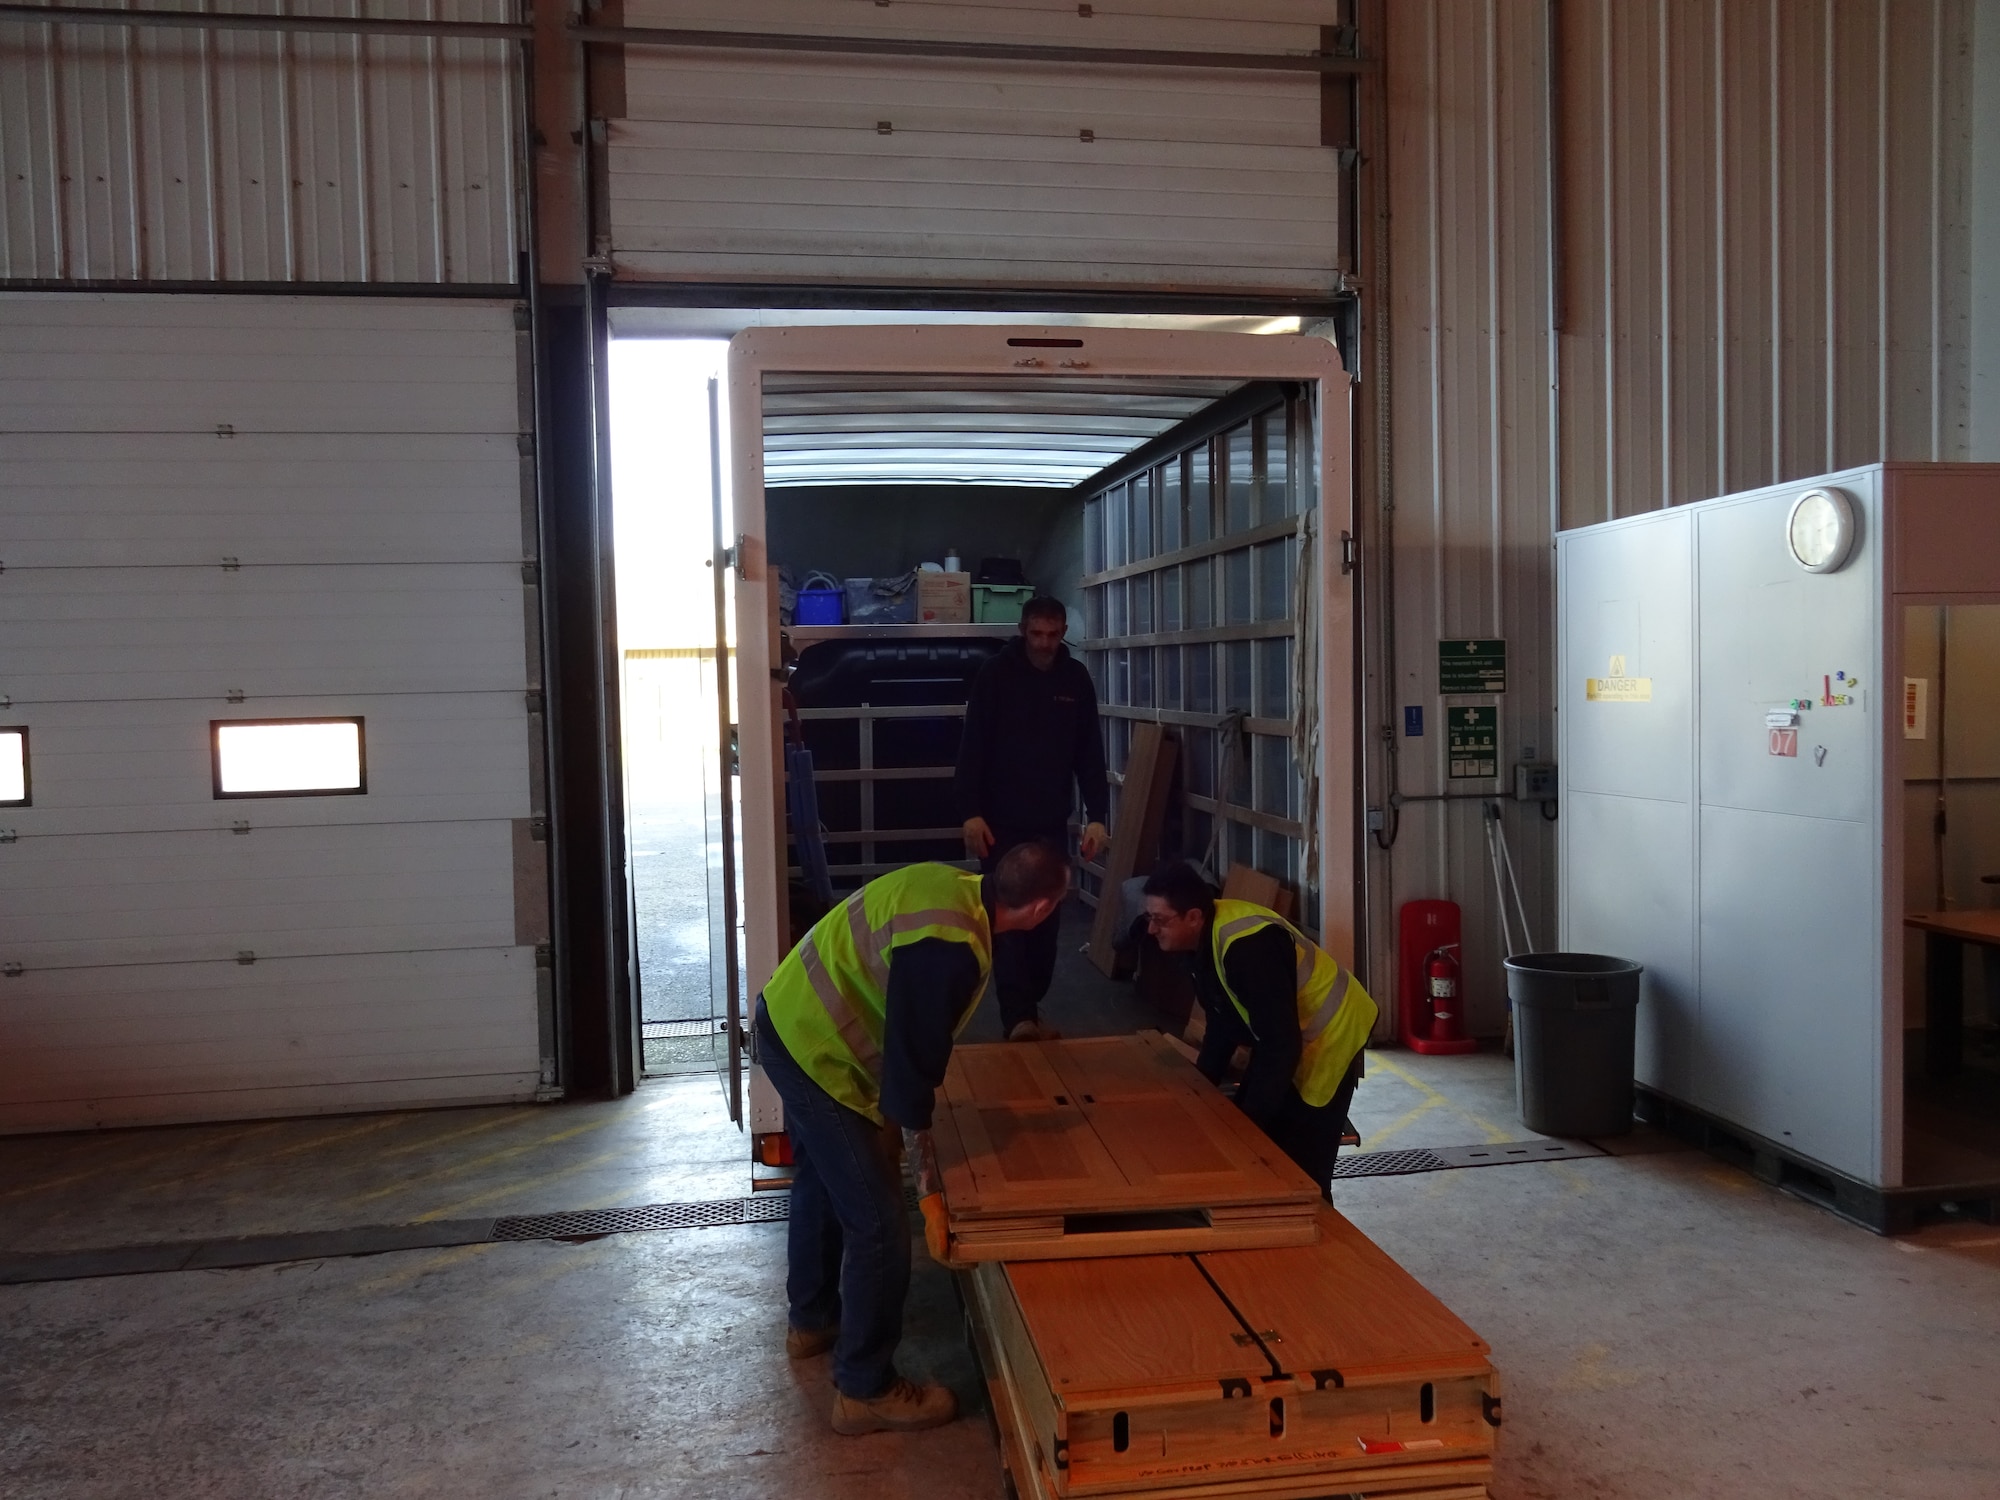 Workers from Arrowdene Moving & Storage in Thetford deliver new appliances at Royal Air Force Lakenheath, England, Jan. 13, 2016. Working with the local community is vital in accomplishing the mission of the 48th Fighter Wing. (Courtesy Photo)